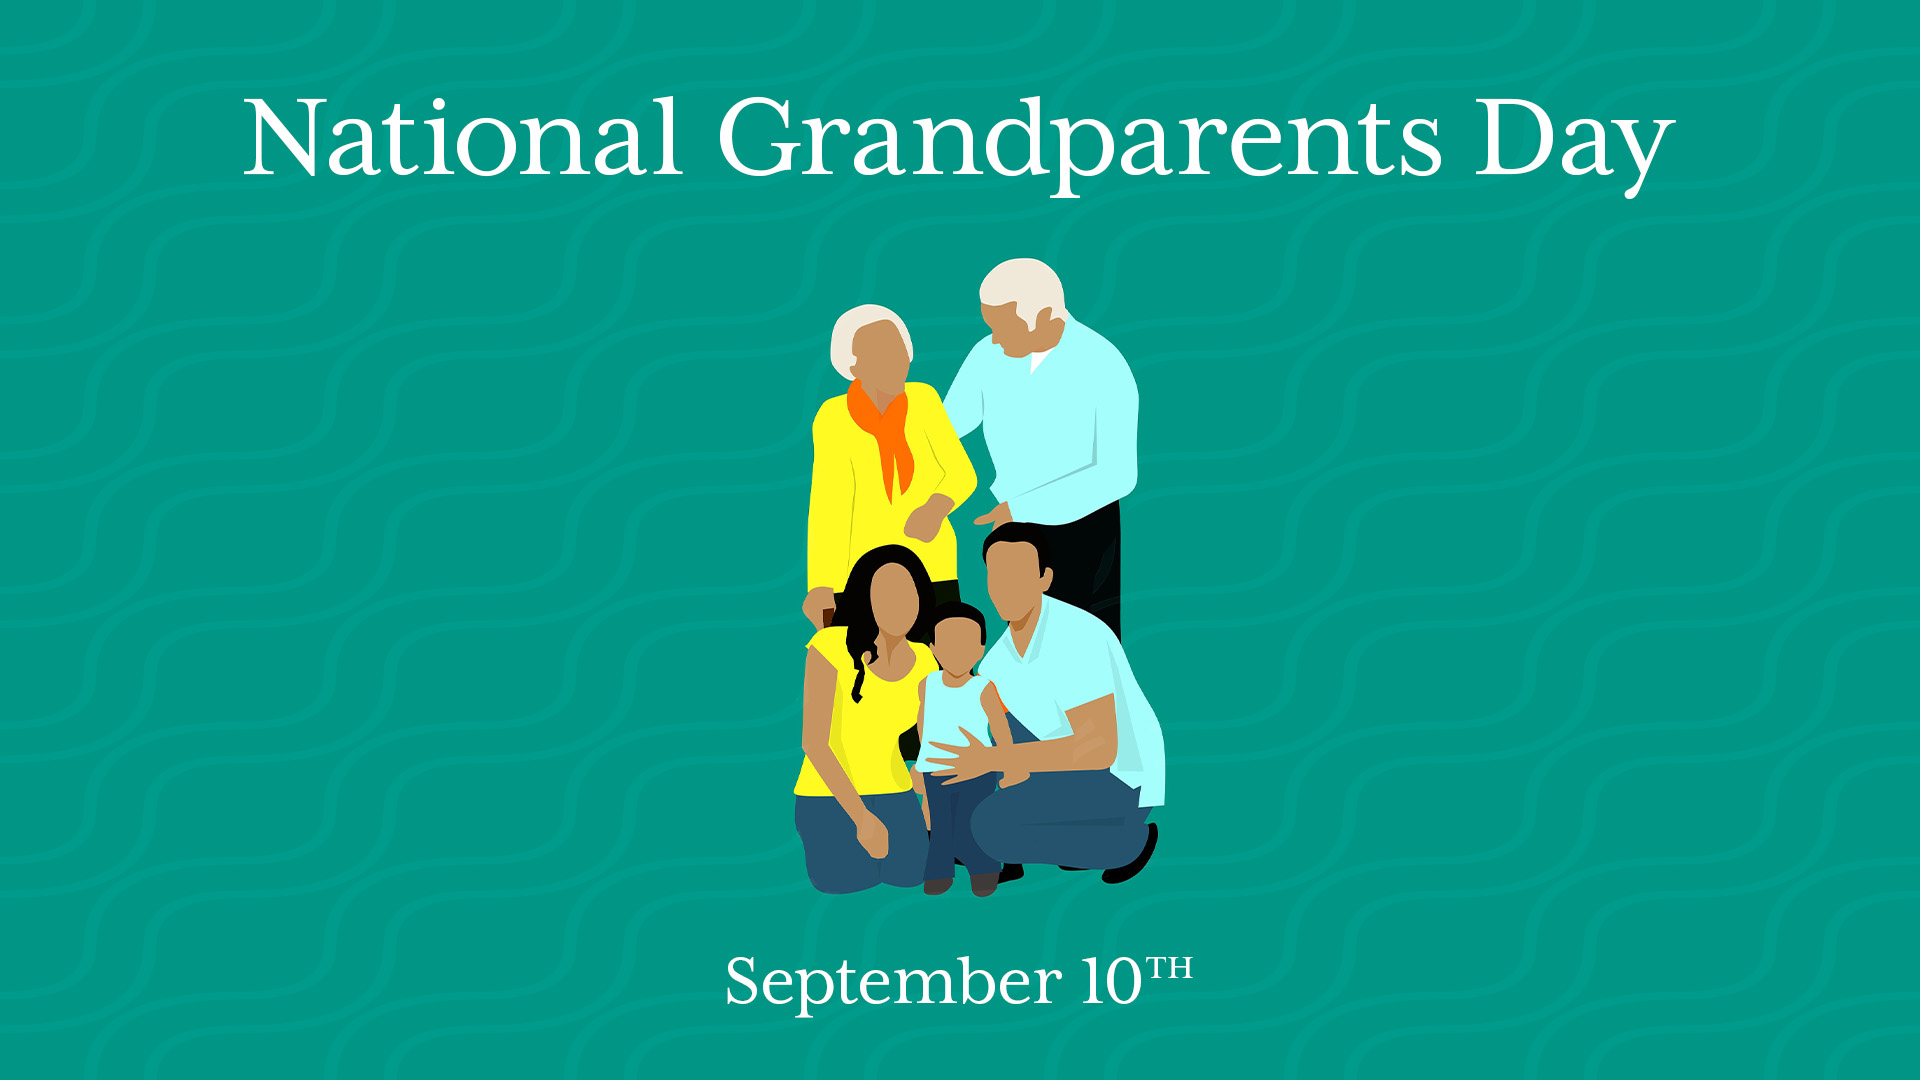 Teal green with paler squiggly line background. White serif font letters at the center top read National Grandparents Day. At the center bottom in smaller white serif letters read September 10th. In the center of the image there is a family a small child wearing blue. Kneeling a mom in yellow and a dad in blue. Standing a grandmother in yellow and a grandfather in blue.